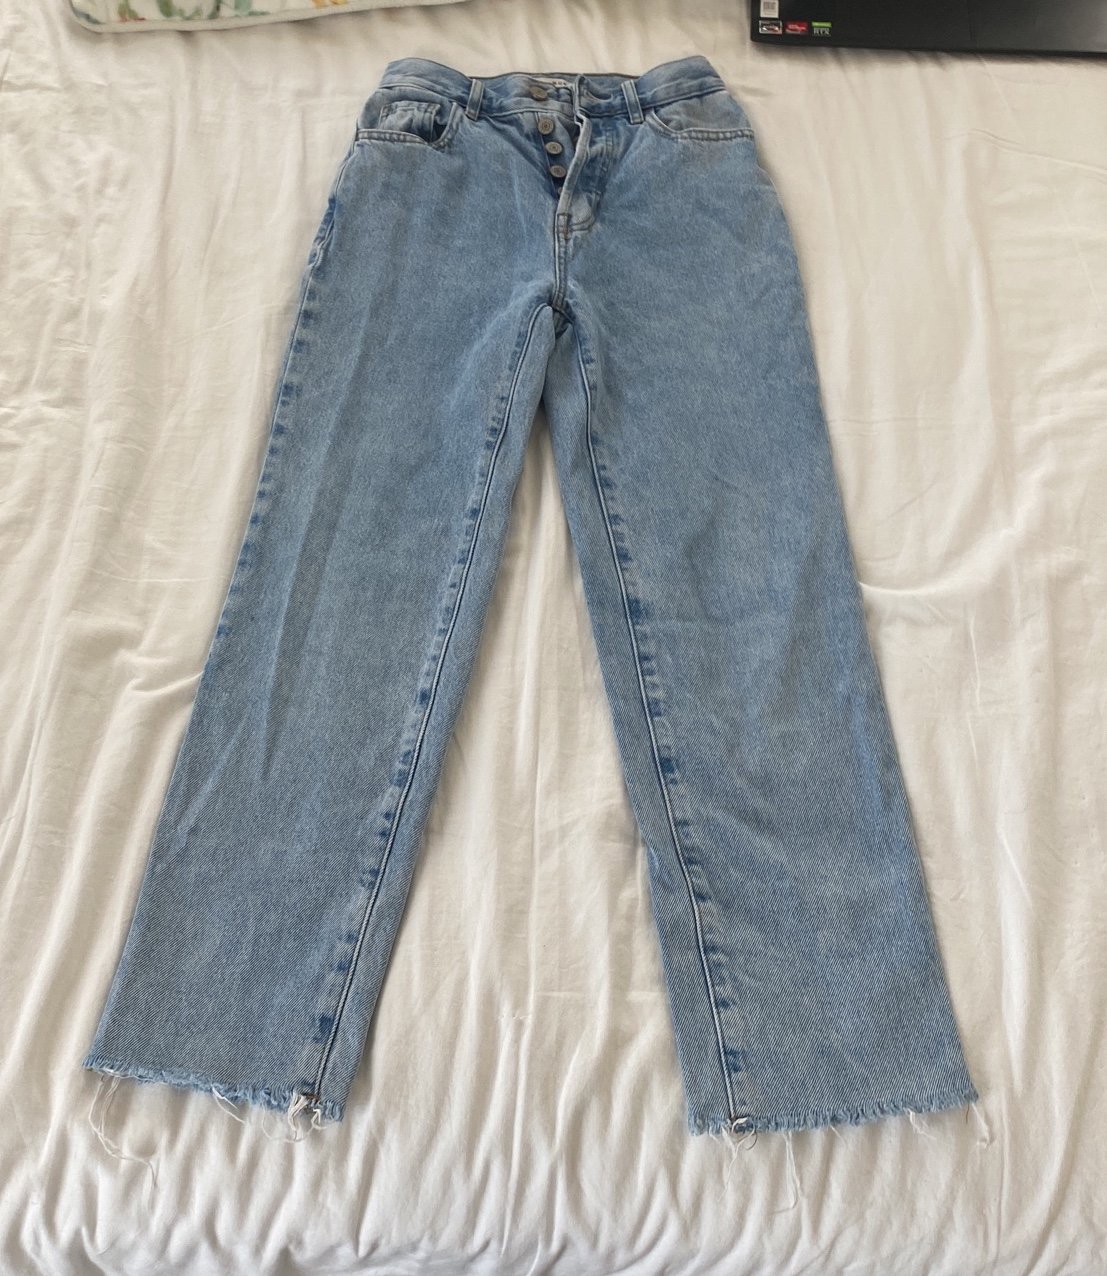 reasonable price Pacsun Straight Jeans hkkxIQVd0 just buy it